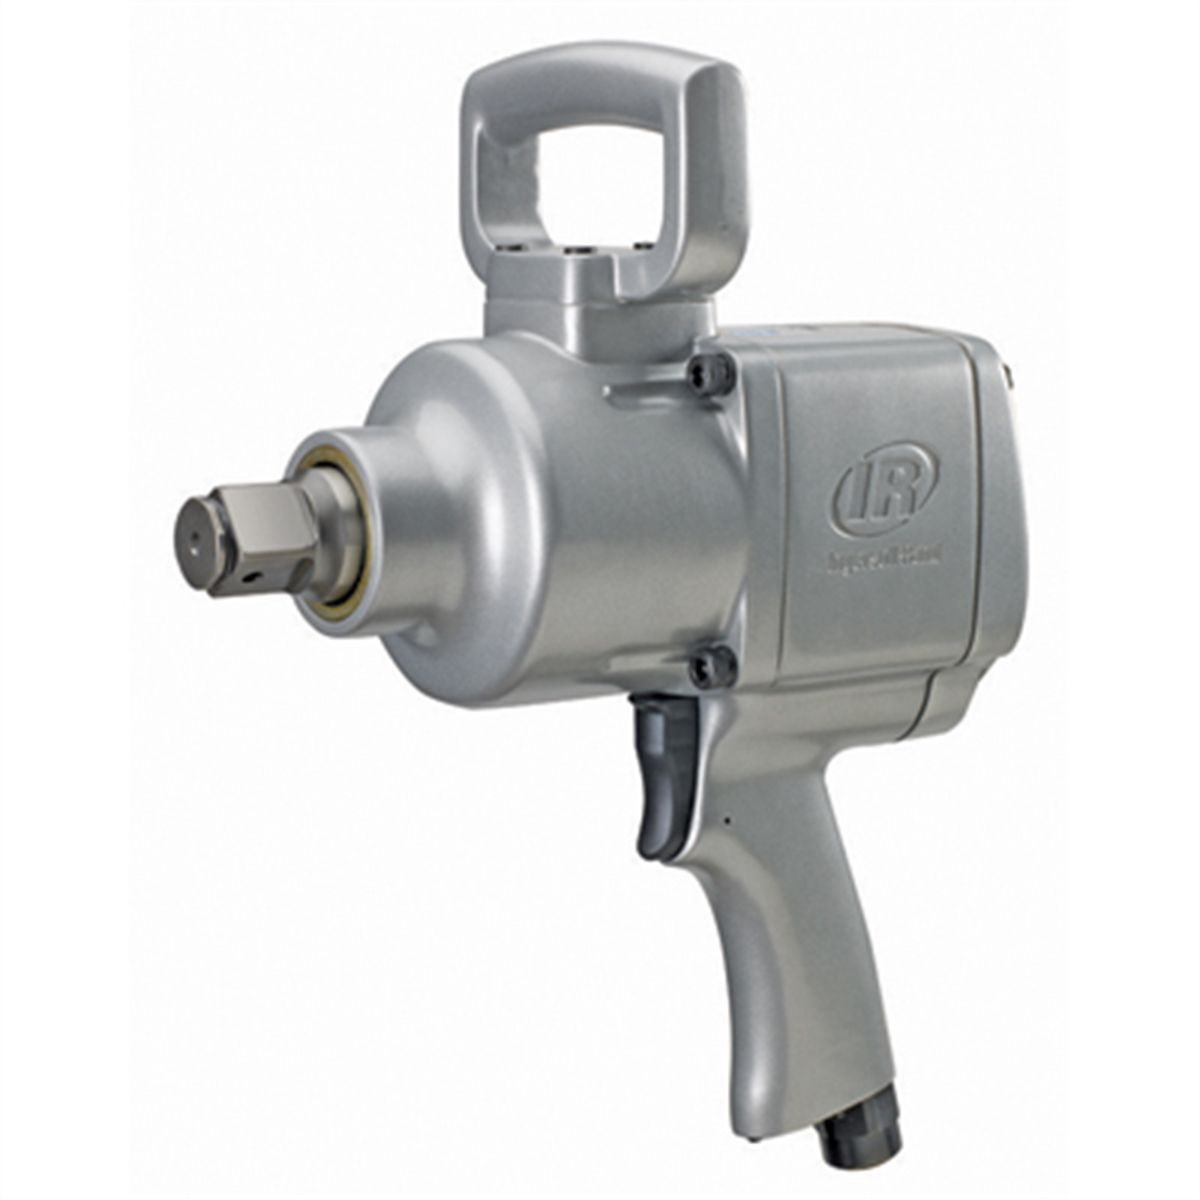 1 Inch Drive Heavy Duty Air Impact Wrench IRT295 1,450 ft-lbsTor